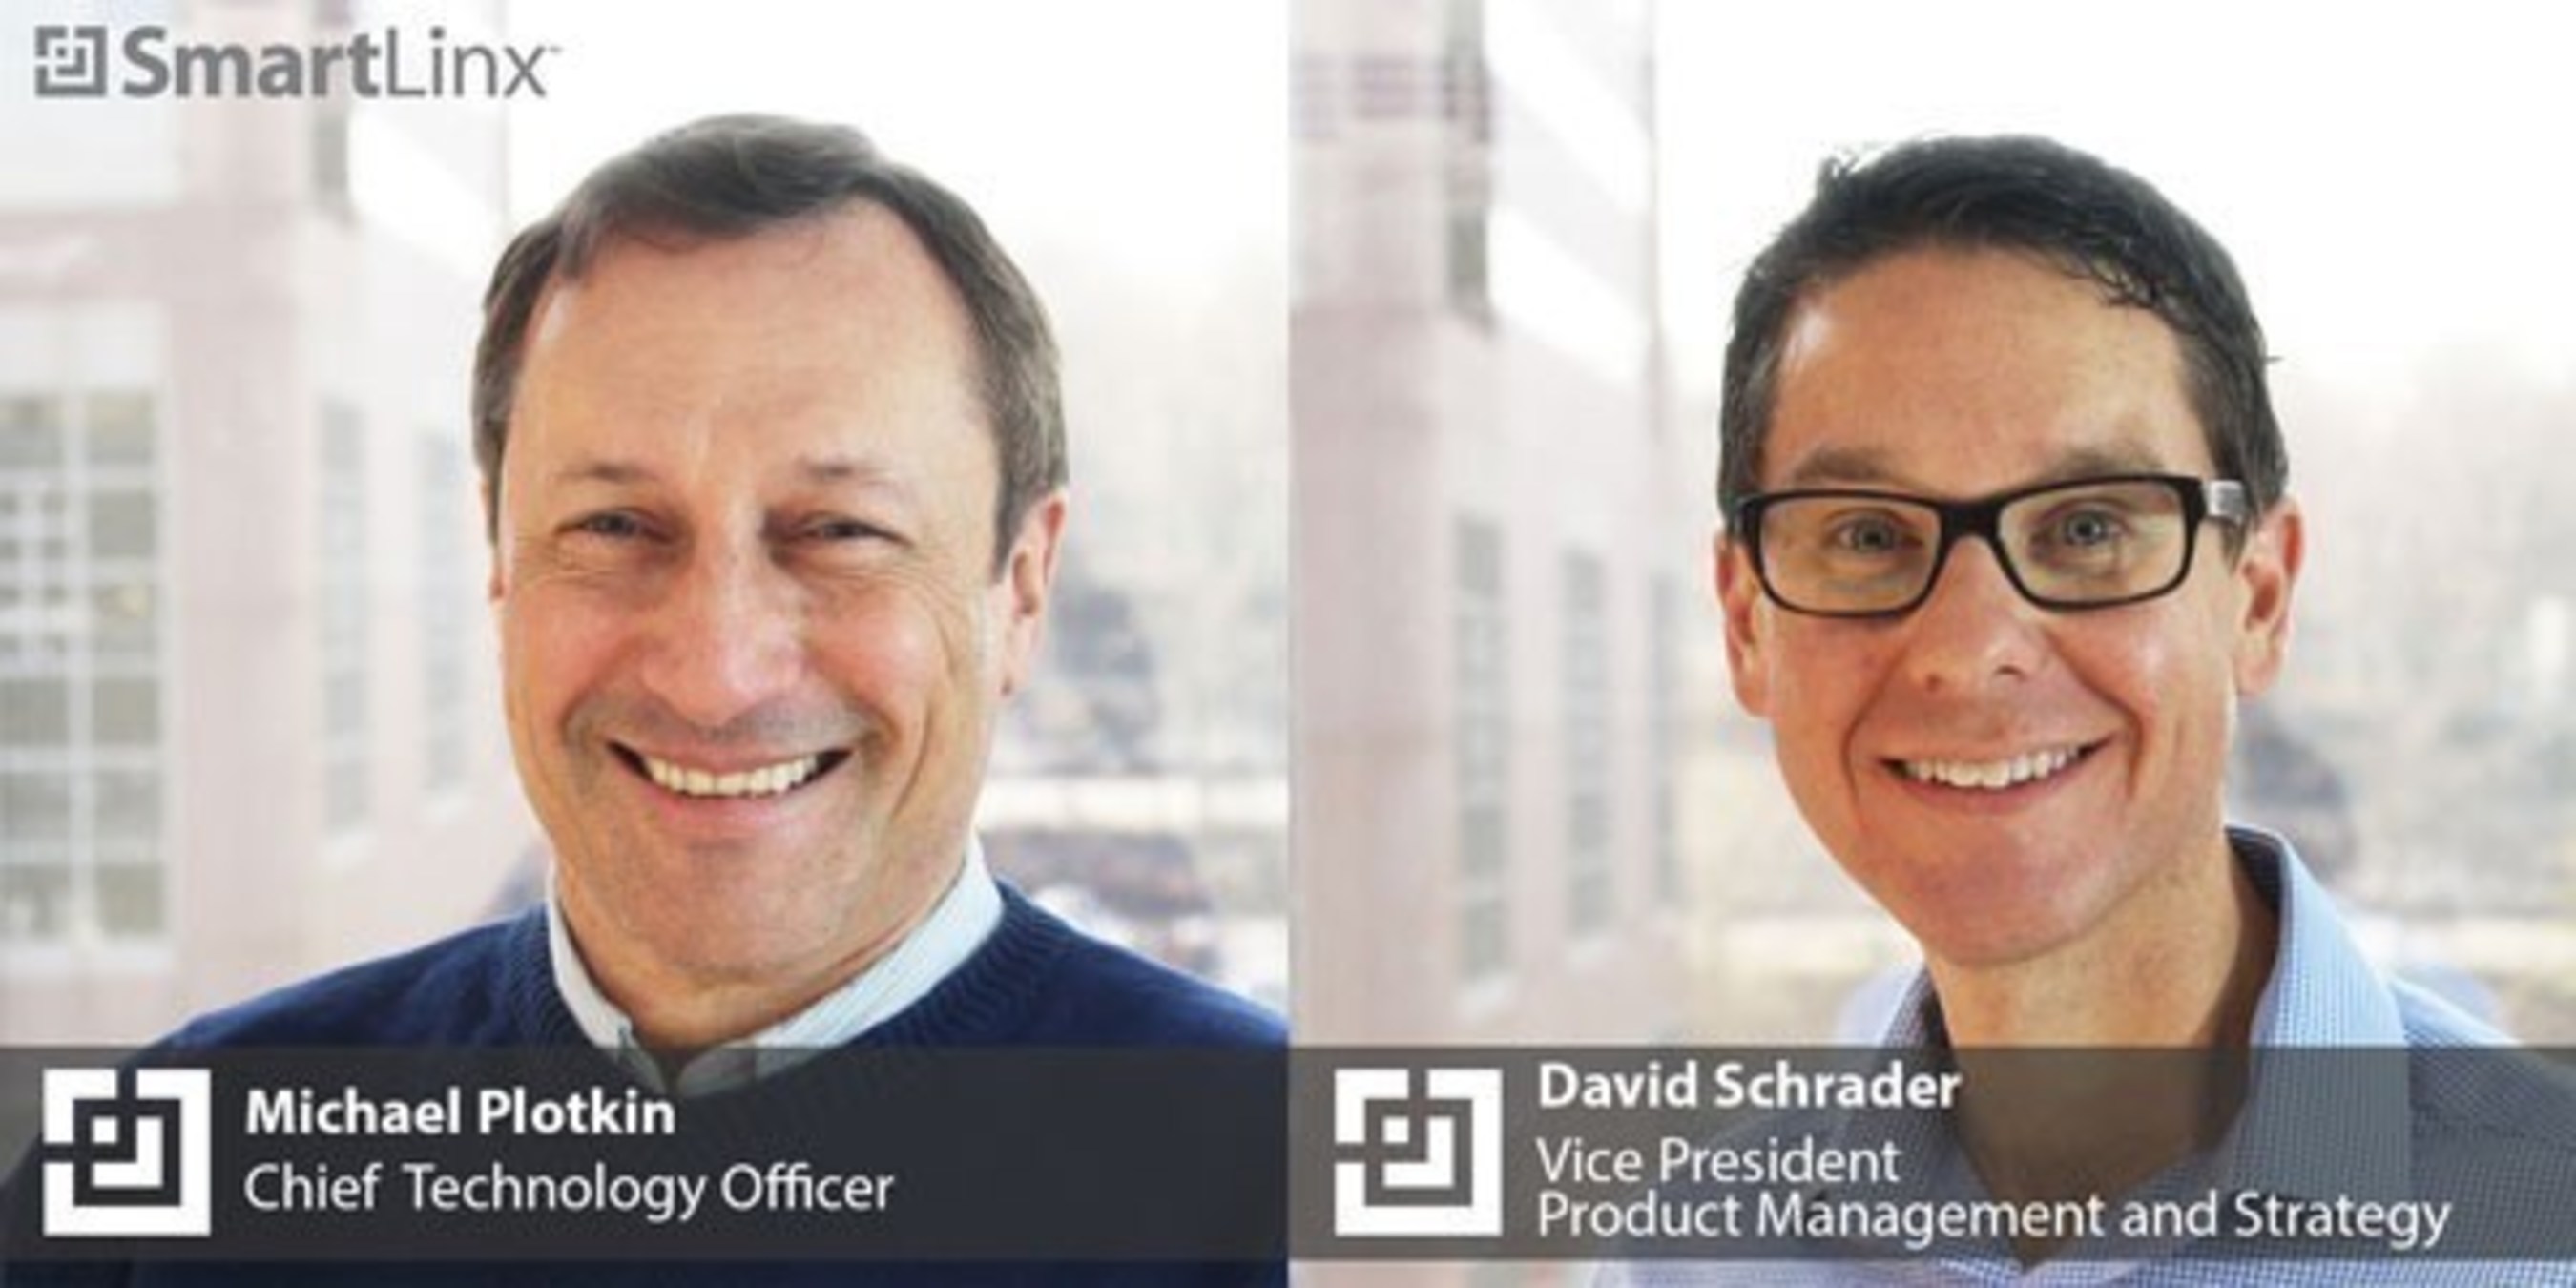 Technology executives, Michael Plotkin and David Schrader, join SmartLinx Solutions